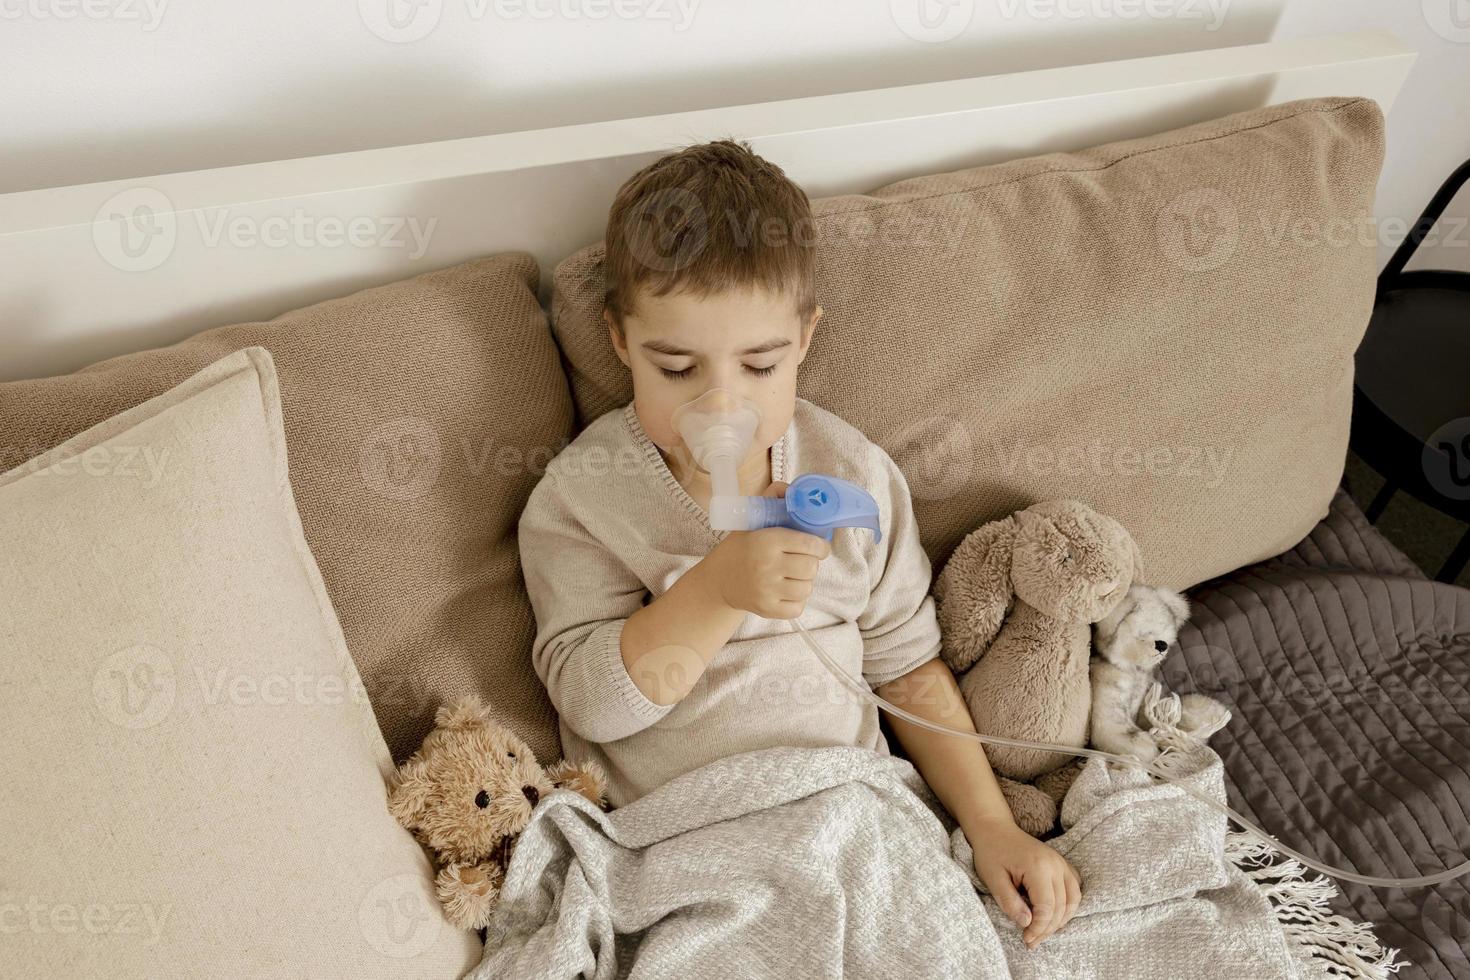 Sick little boy with inhaler for cough treatment. Unwell kid doing inhalation on his bed. Flu season. Medical procedure at home. Interior and clothes in natural earth colors. Cozy environment. photo